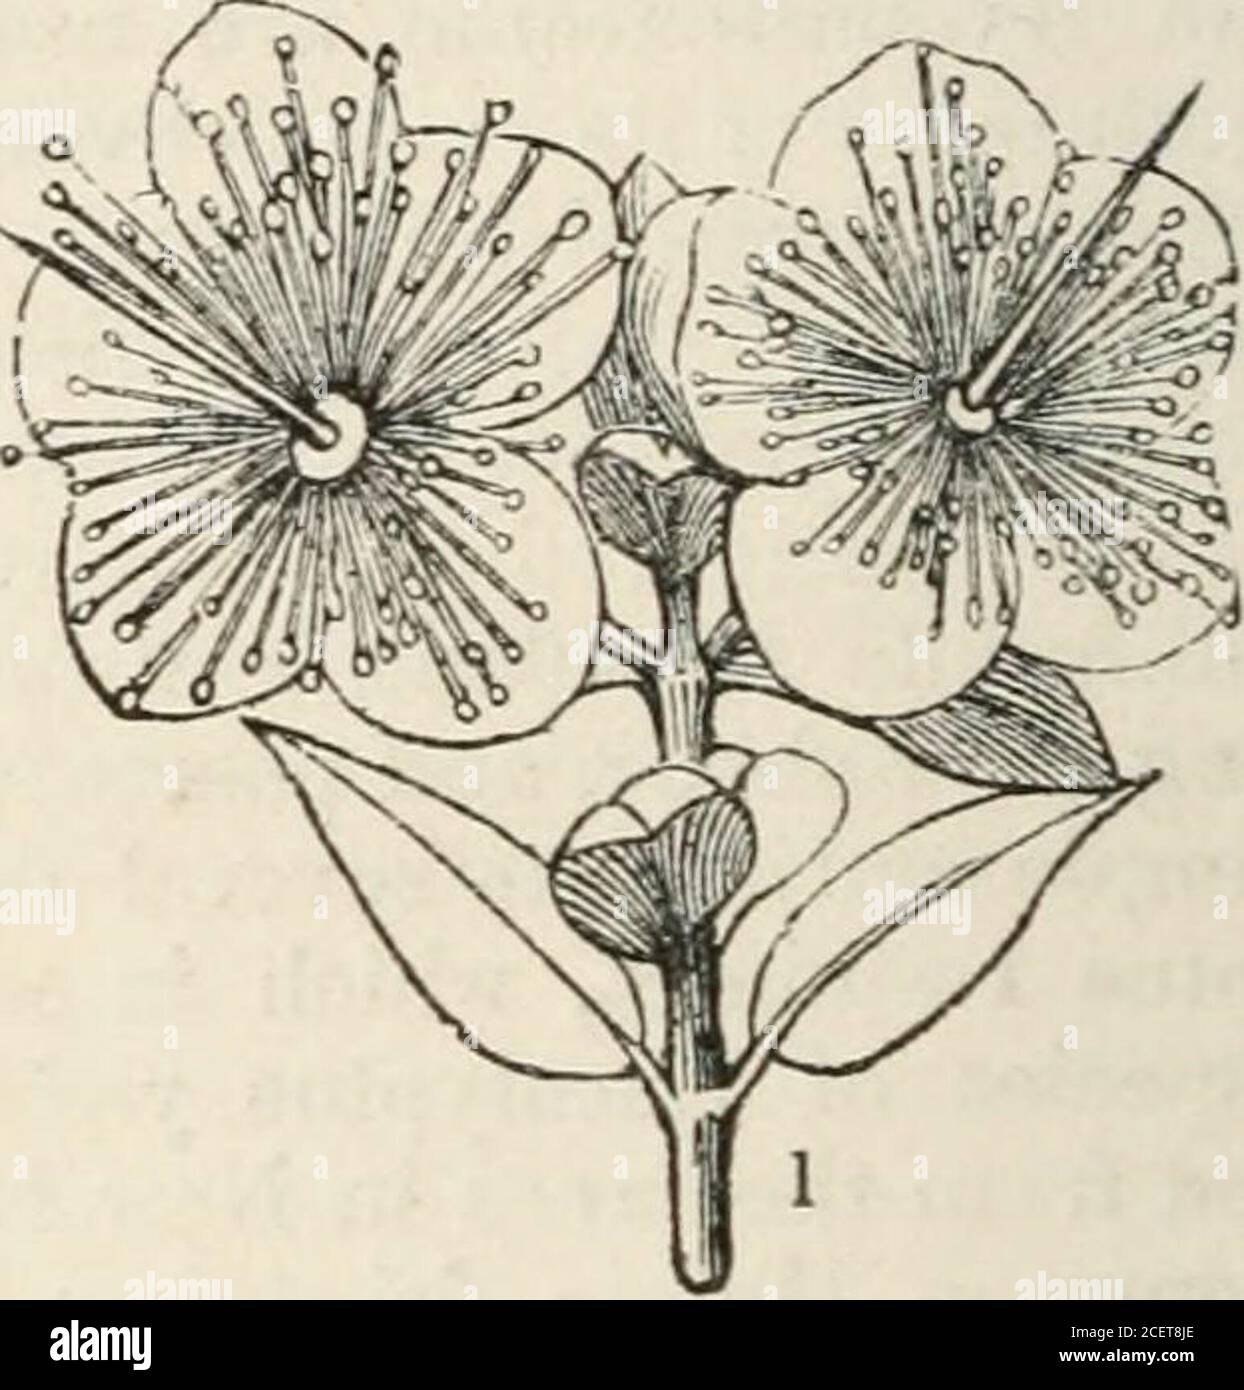 . The vegetable kingdom : or, The structure, classification, and uses of plants, illustrated upon the natural system. Fig. CCCCXCIII, Fig. CCCCXCIII.—1. twig of Myrtus communis; 2. a flower divided perpendicularly. Myrtales.] LECYTHIDACE.E. 739 Order CCLXXXIII. LECYTHIDACEiE.—Lecyths. Lecythideae, Richard, MSS. Poiteau Mem. Miit. 13. 141. (1825) ; DC. Prodr. 3. 290 ; a sect, of Myrtacex.Ach. Richard in Ann. des Sc. 1. 321; Bartl. Ord. Nat. 332 ; Martina Conspec. No. 320. (18351 ;Endl. Gen. p. 1284 ; Meisner, 109. Diagnosis.—Myrtal Exor/ens, with a plurilocular ovaryy polypetalous flotvcrs, a r Stock Photo